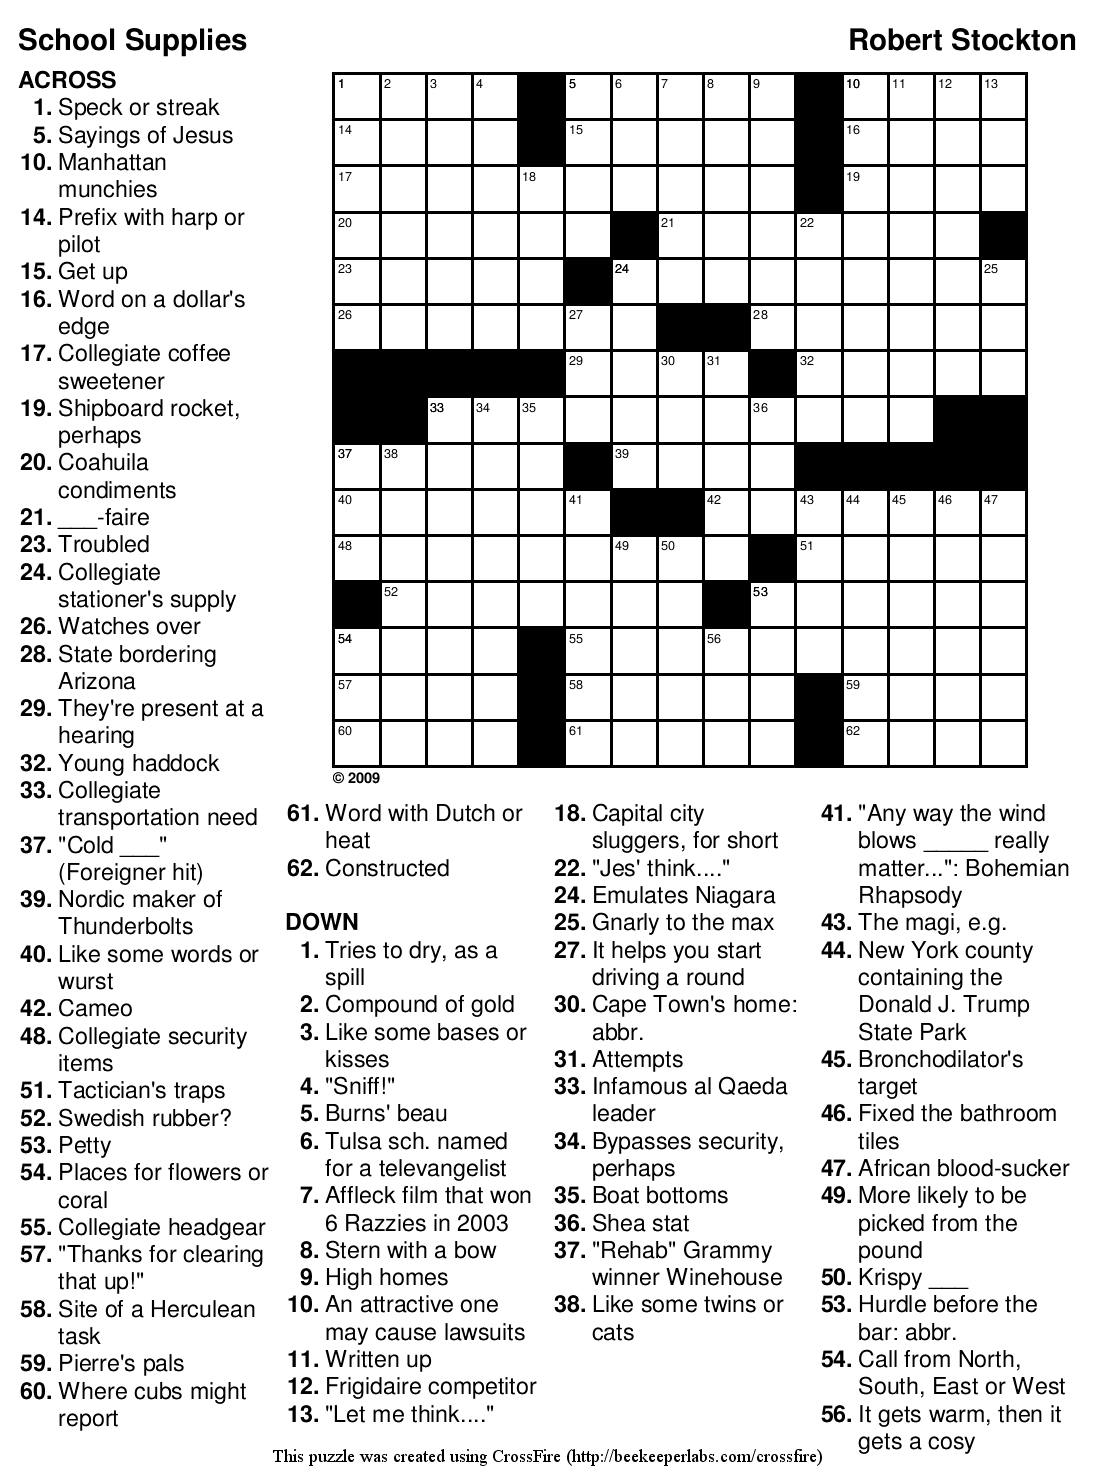 Printable Crosswords For Adults Free Printable Crossword Puzzles - Free Crossword Puzzle Maker Printable 50 Words